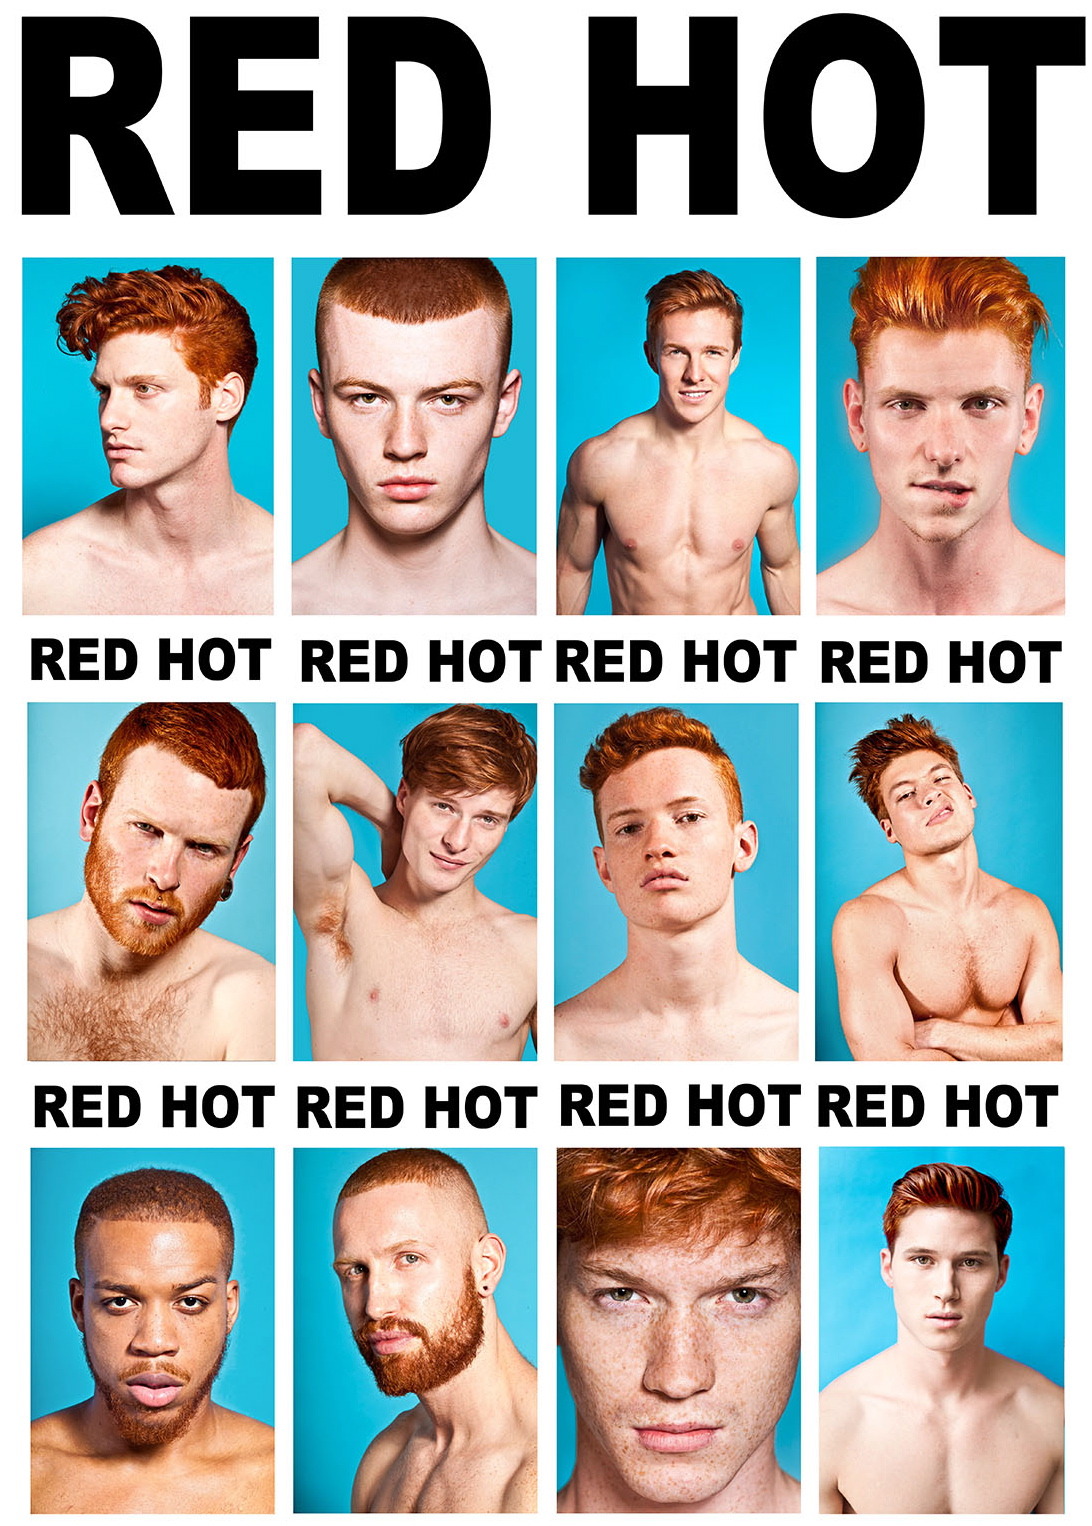 gingers-snaps:  A Red Hot Exhibit by Thomas Knights (in London)… Going to this